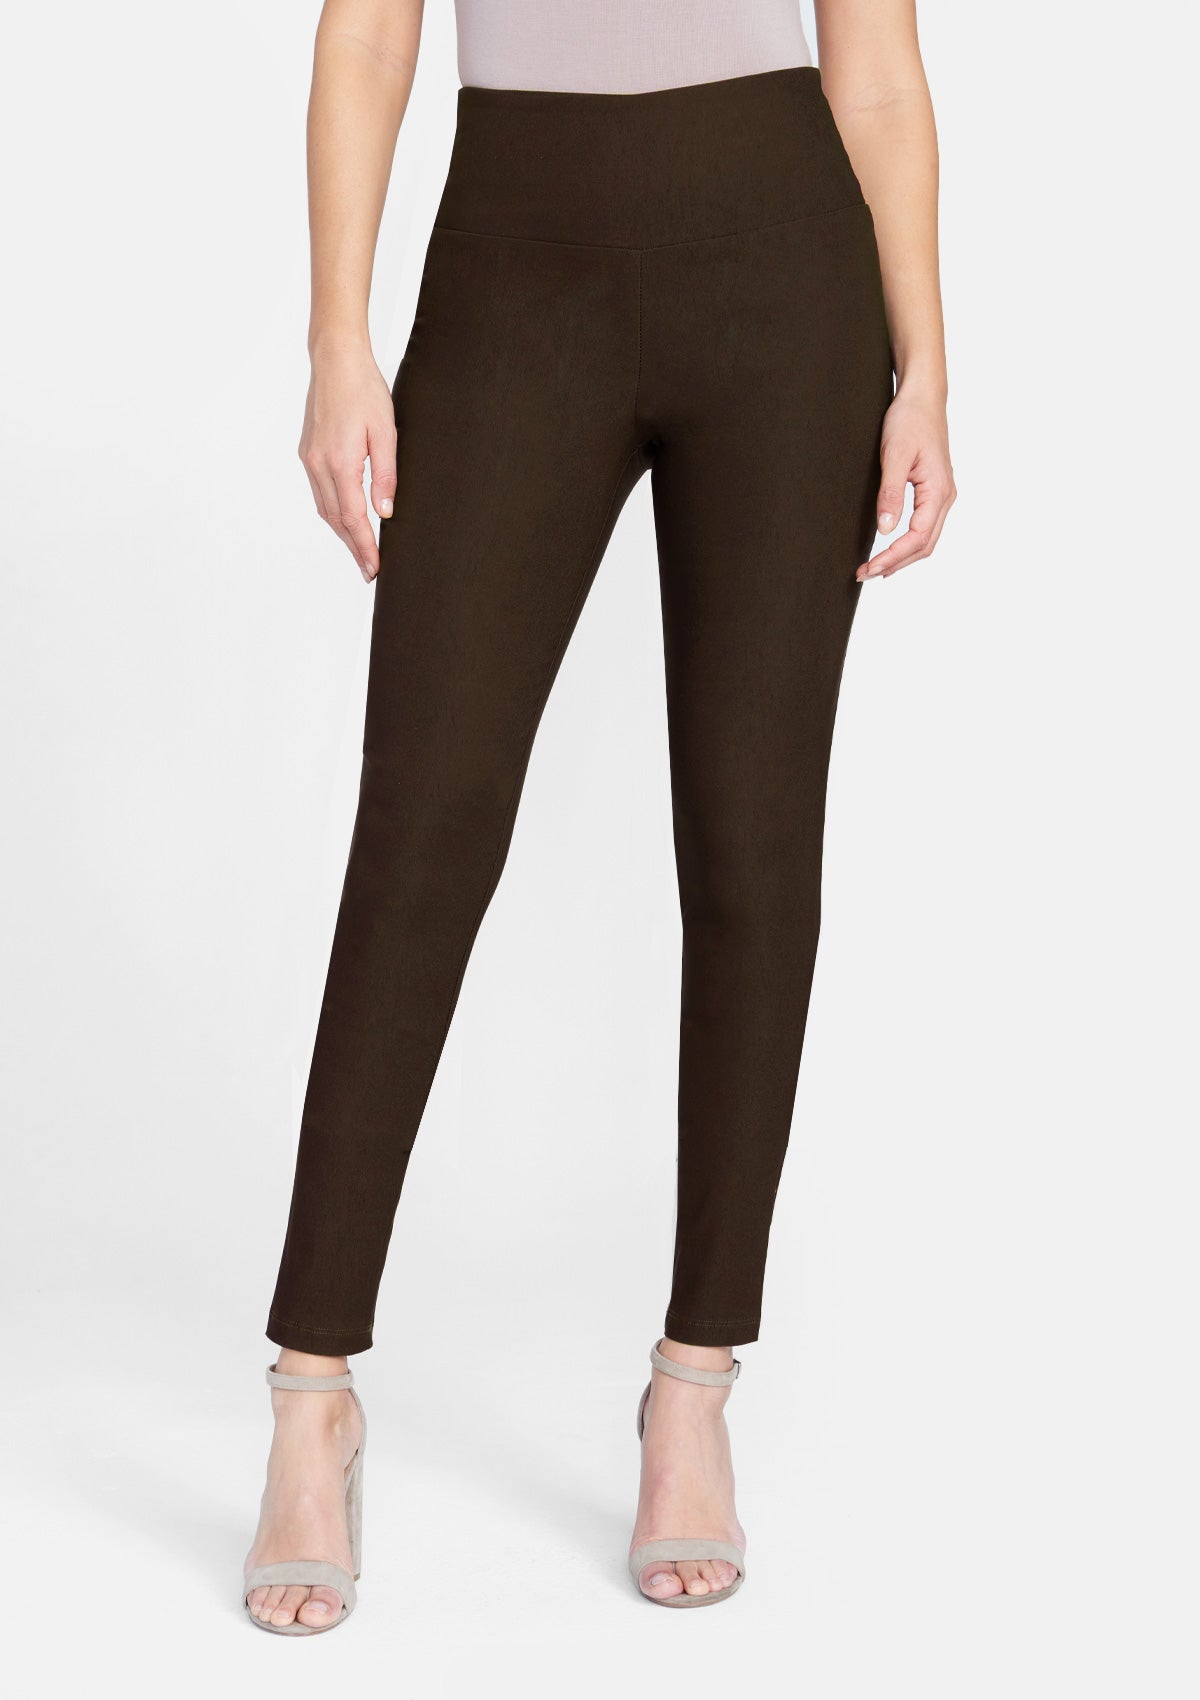 Tall Shannon Pixie Pants for Women in Brown